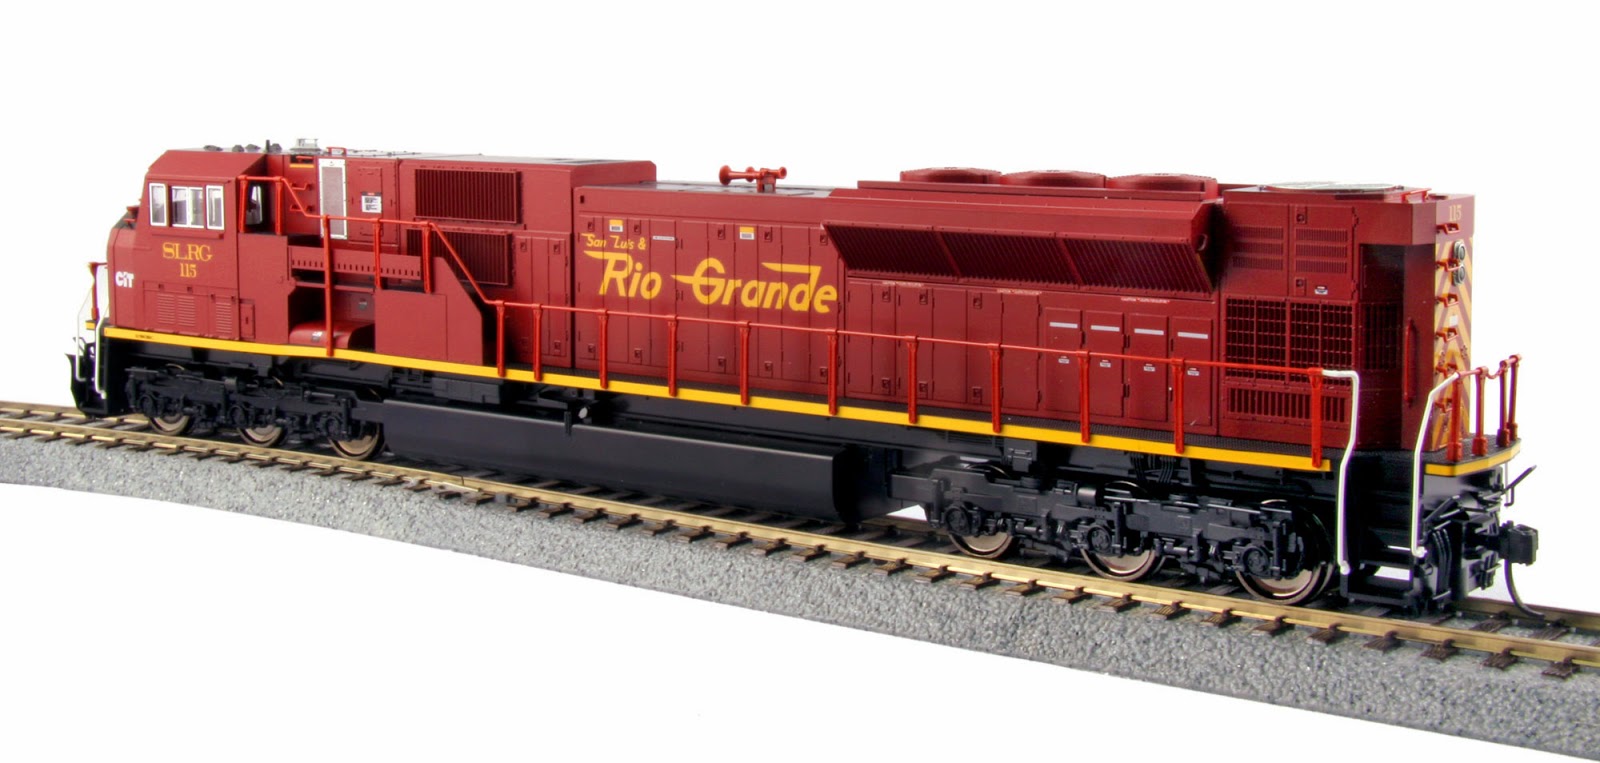 Model Trains For Beginners: HO Scale Locomotives